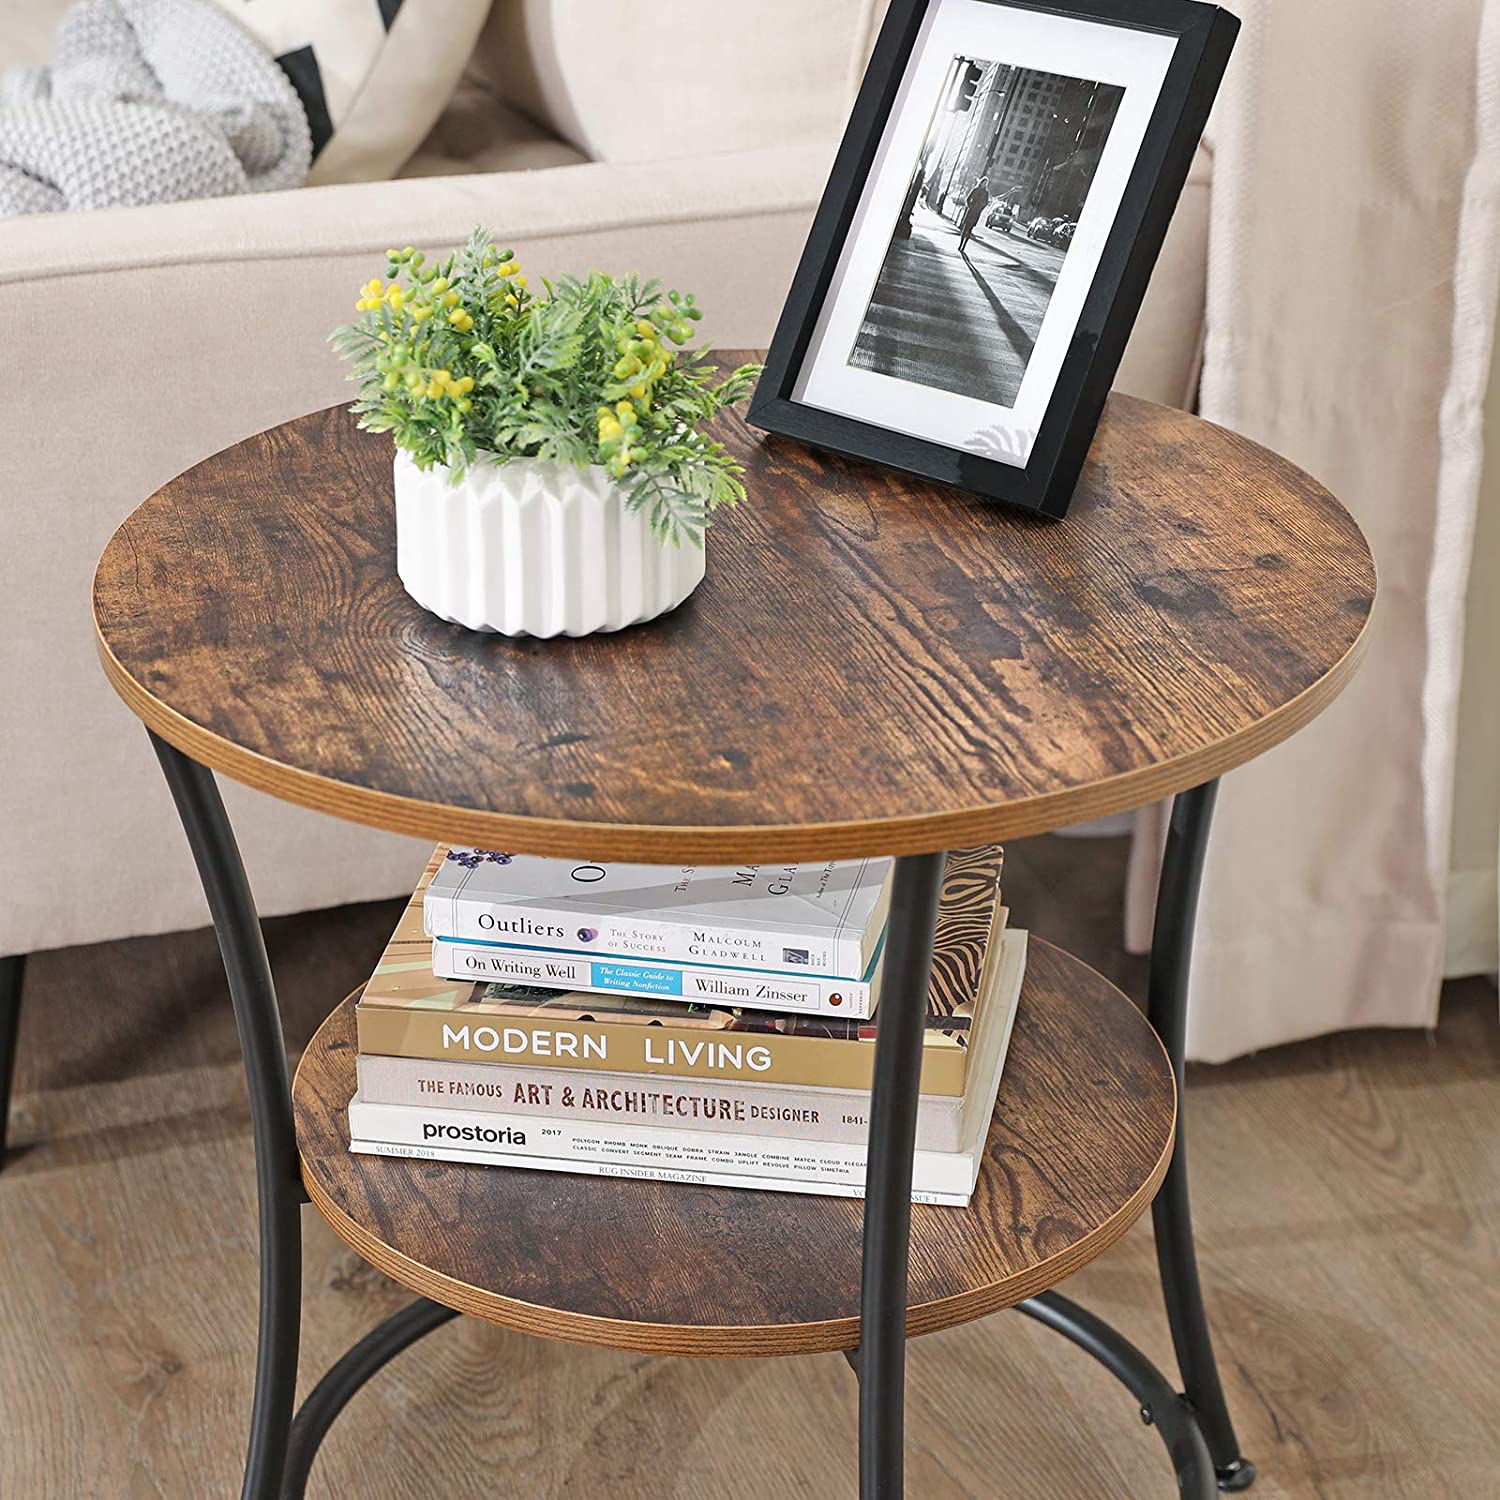 Lifespace Unique Living Room Round Coffee Side Table - Lifespace